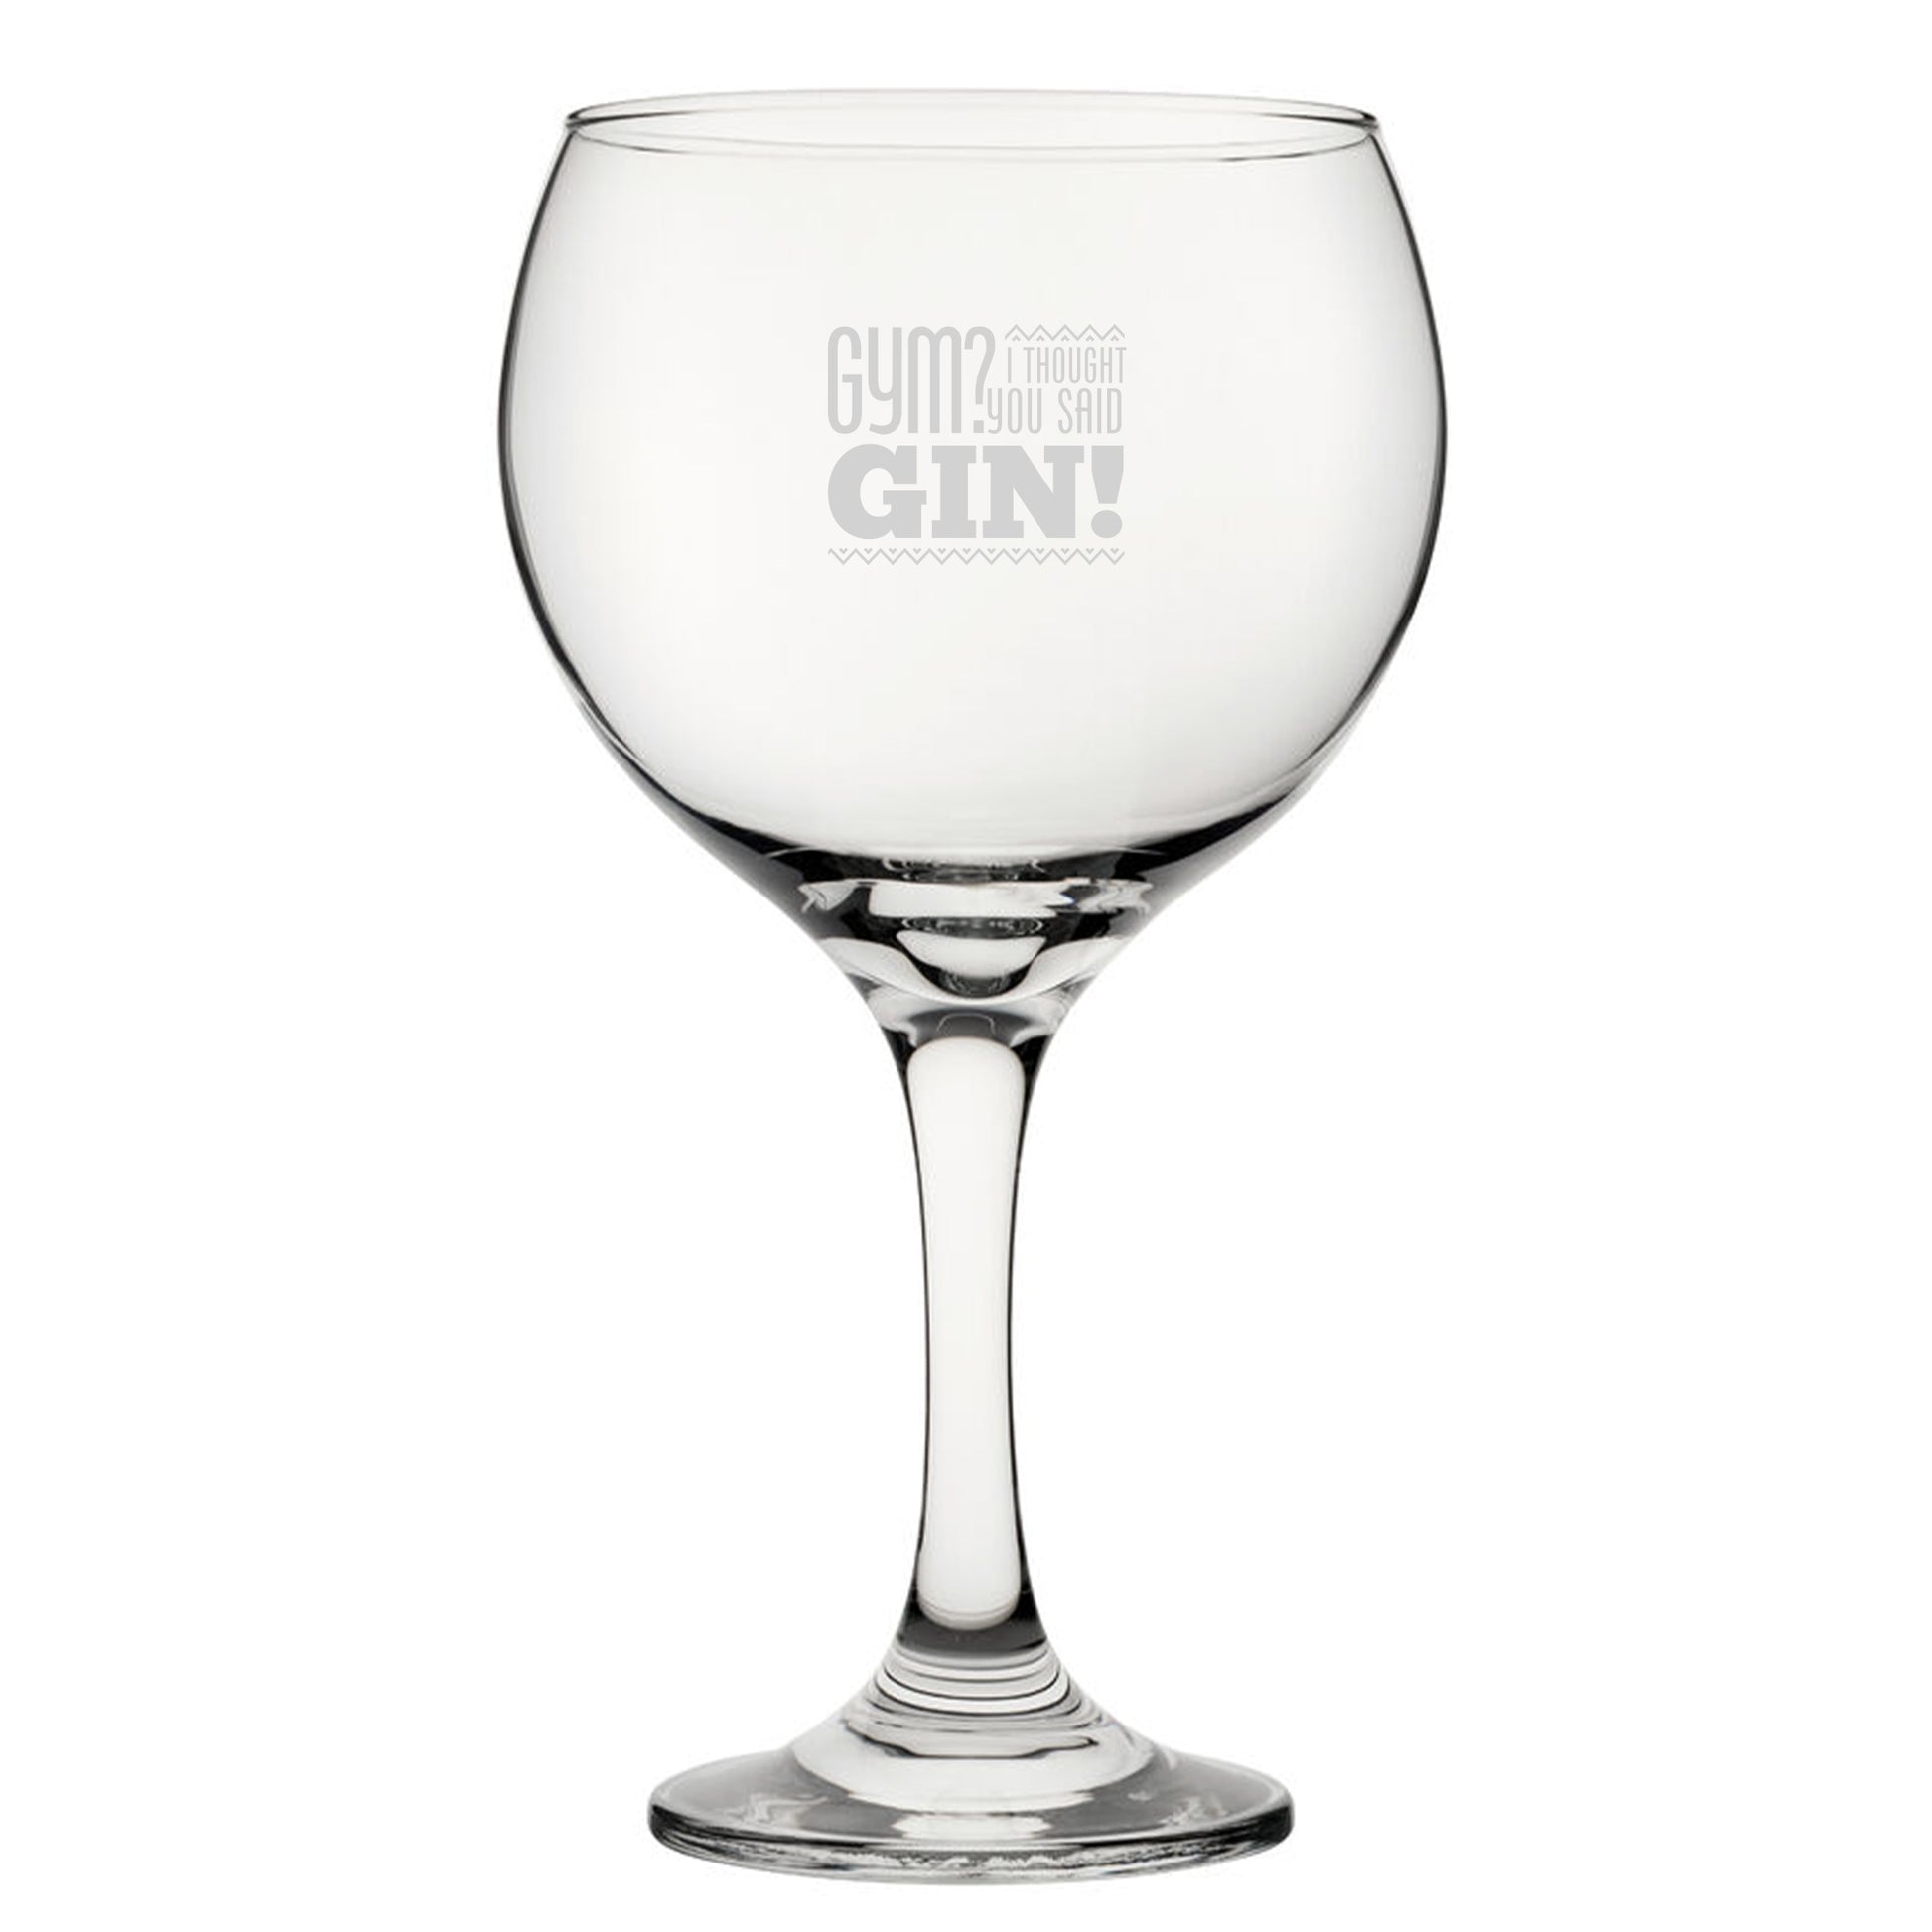 Gym? I Thought You Said Gin! - Engraved Novelty Gin Balloon Cocktail Glass Image 2